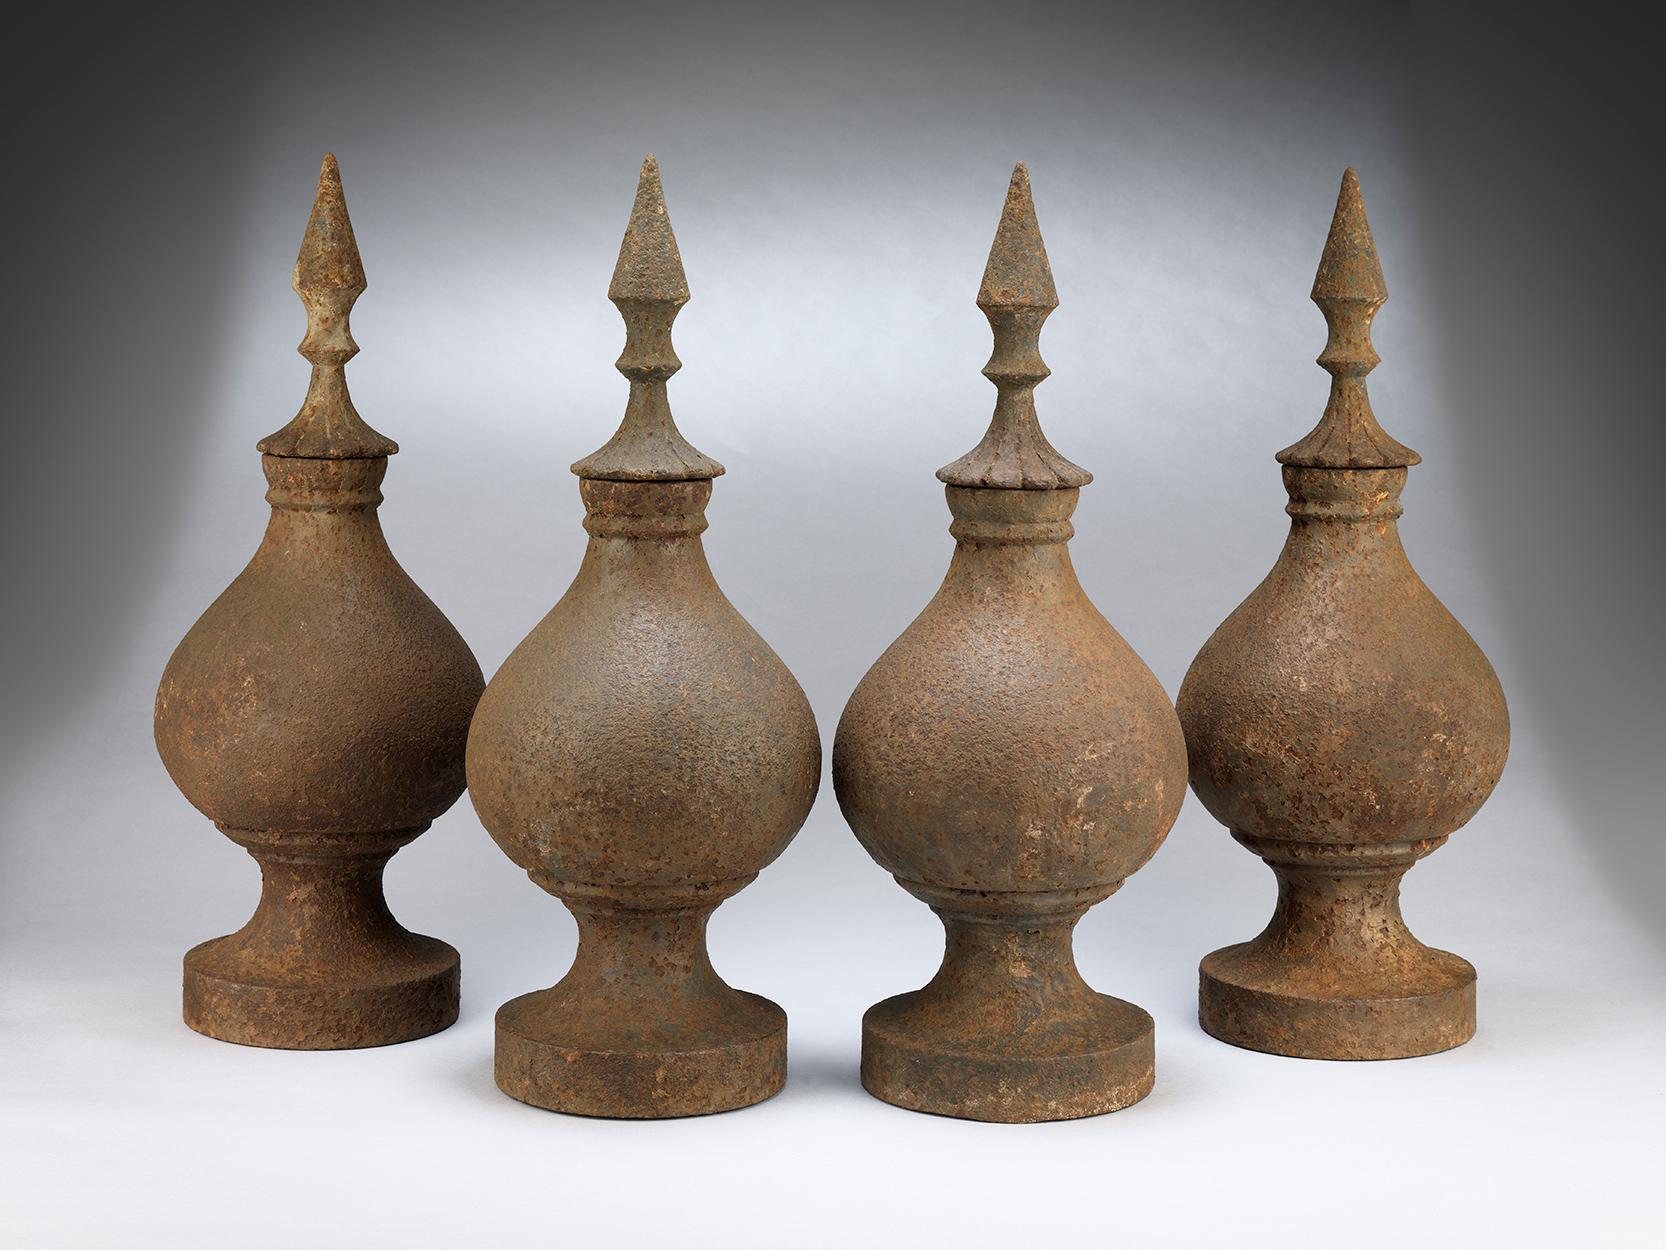 Remarkable Set of Four Graphic Architectural Finials